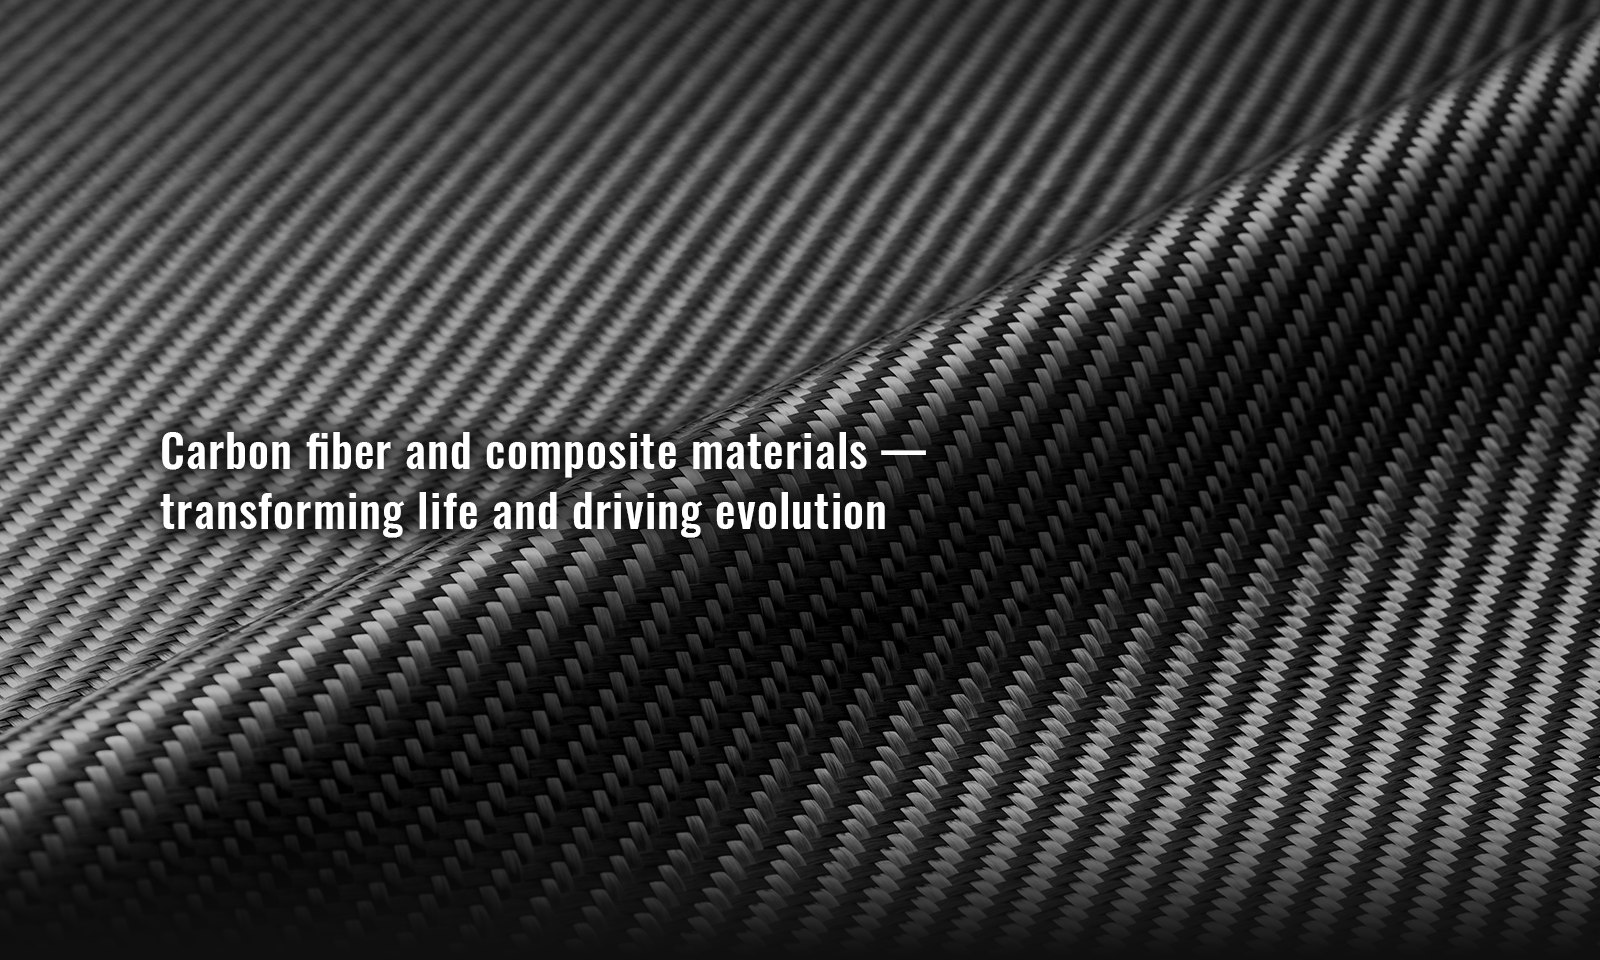 Carbon fiber and composite materials — transforming life and driving evolution Image 1